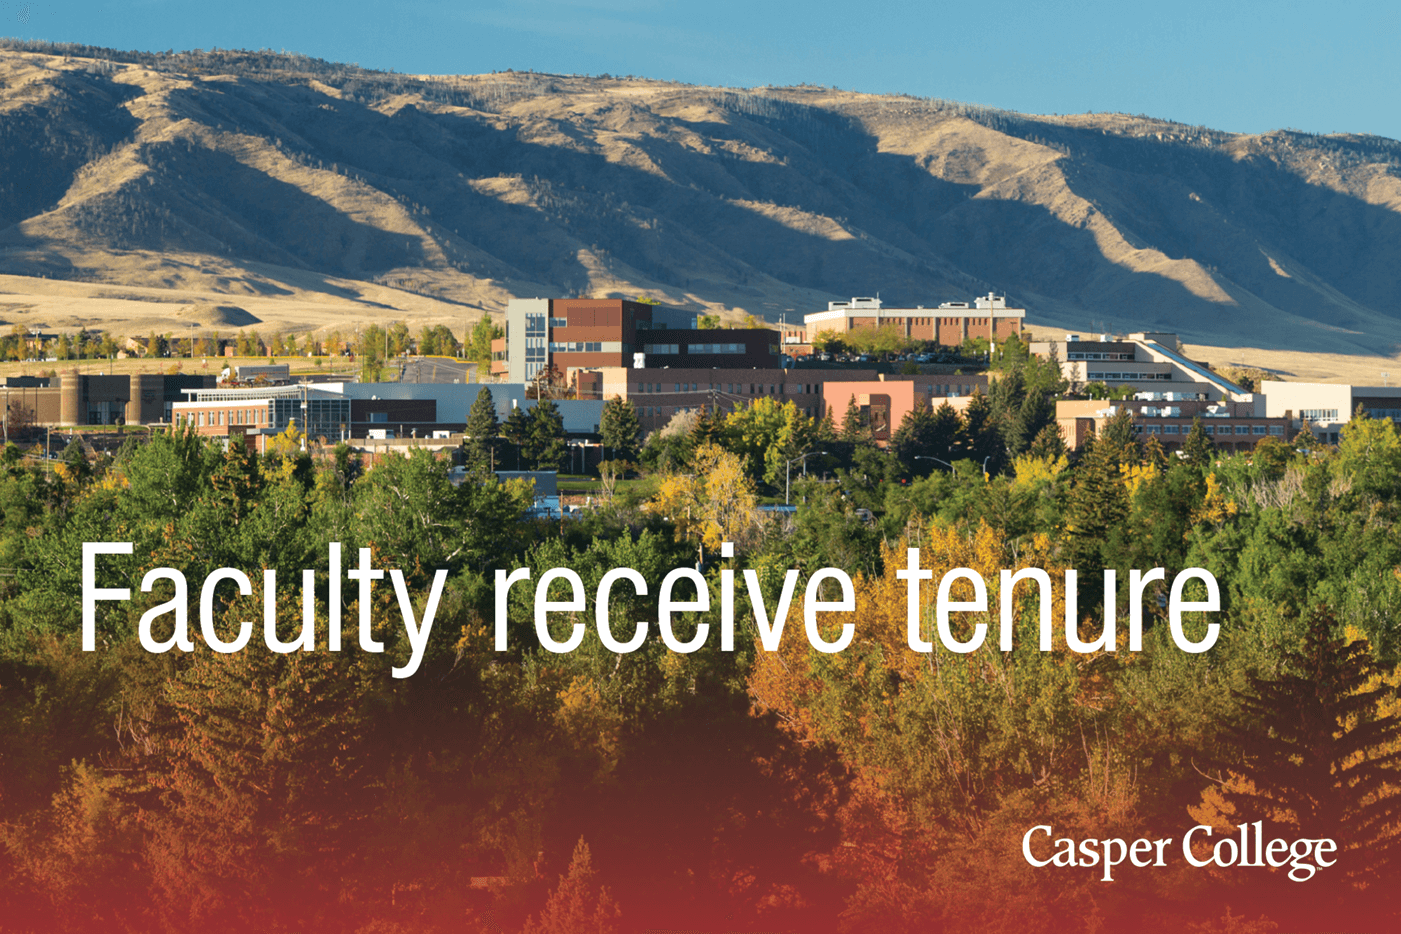 Photo of the Casper College campus with the words "Faculty receive tenure."